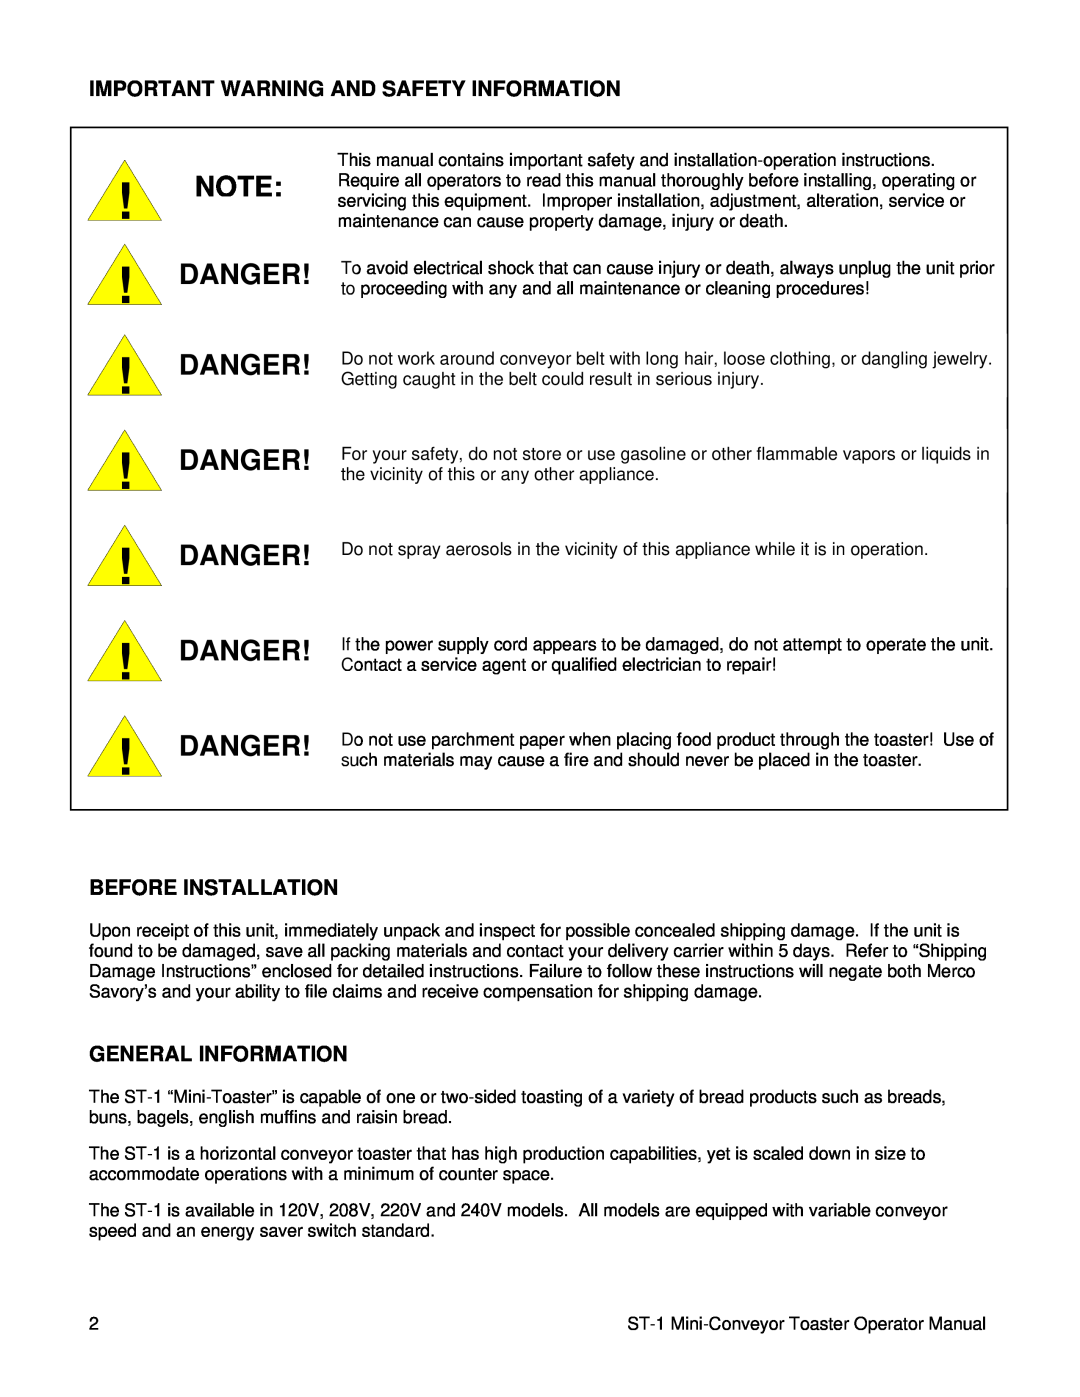 Lincoln ST-1 specifications Important Warning And Safety Information, Before Installation, General Information 